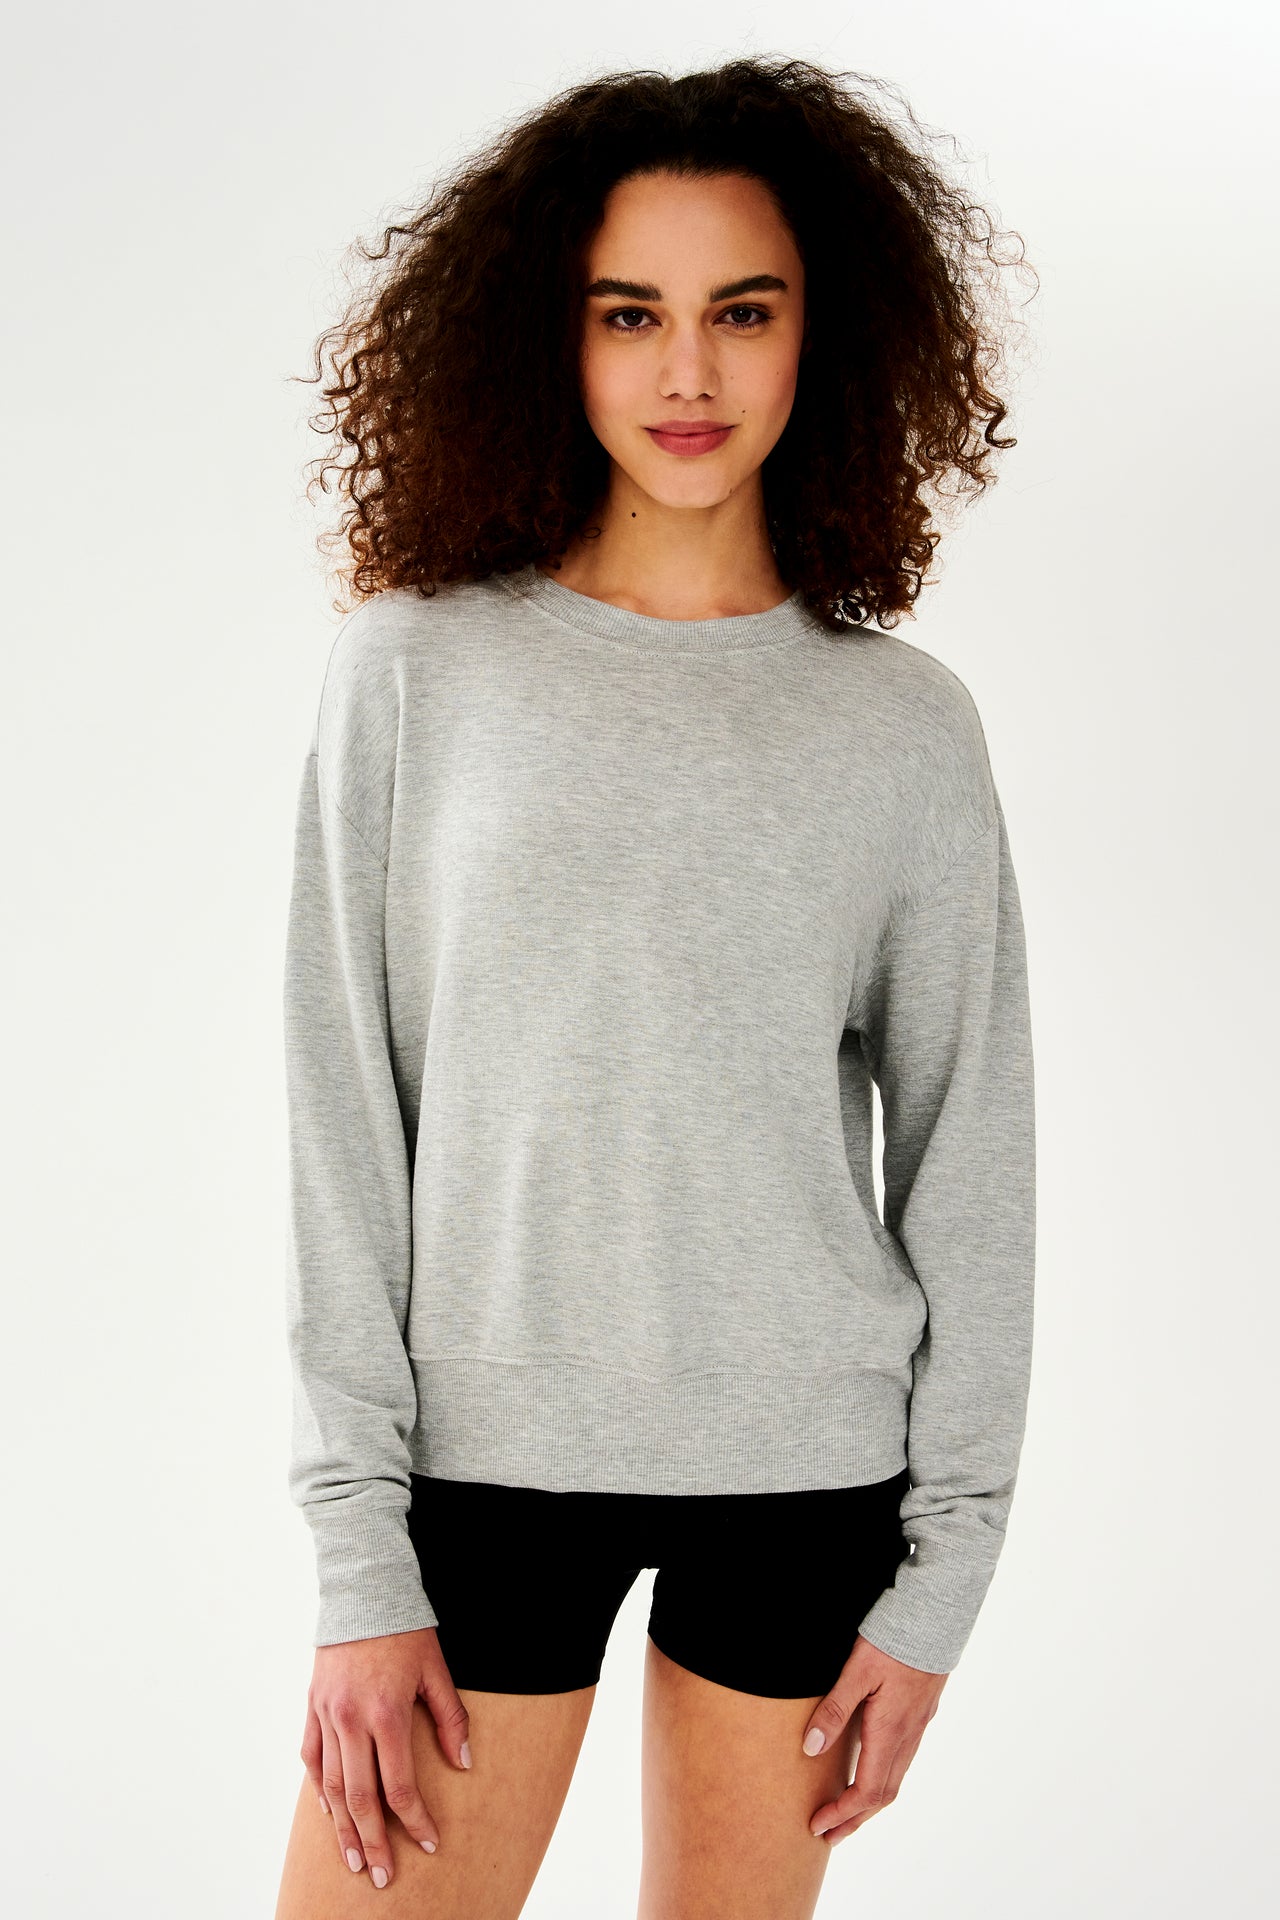 Front side view of woman with curly dark brown hair wearing a light grey crewneck sweatshirt and black shorts 